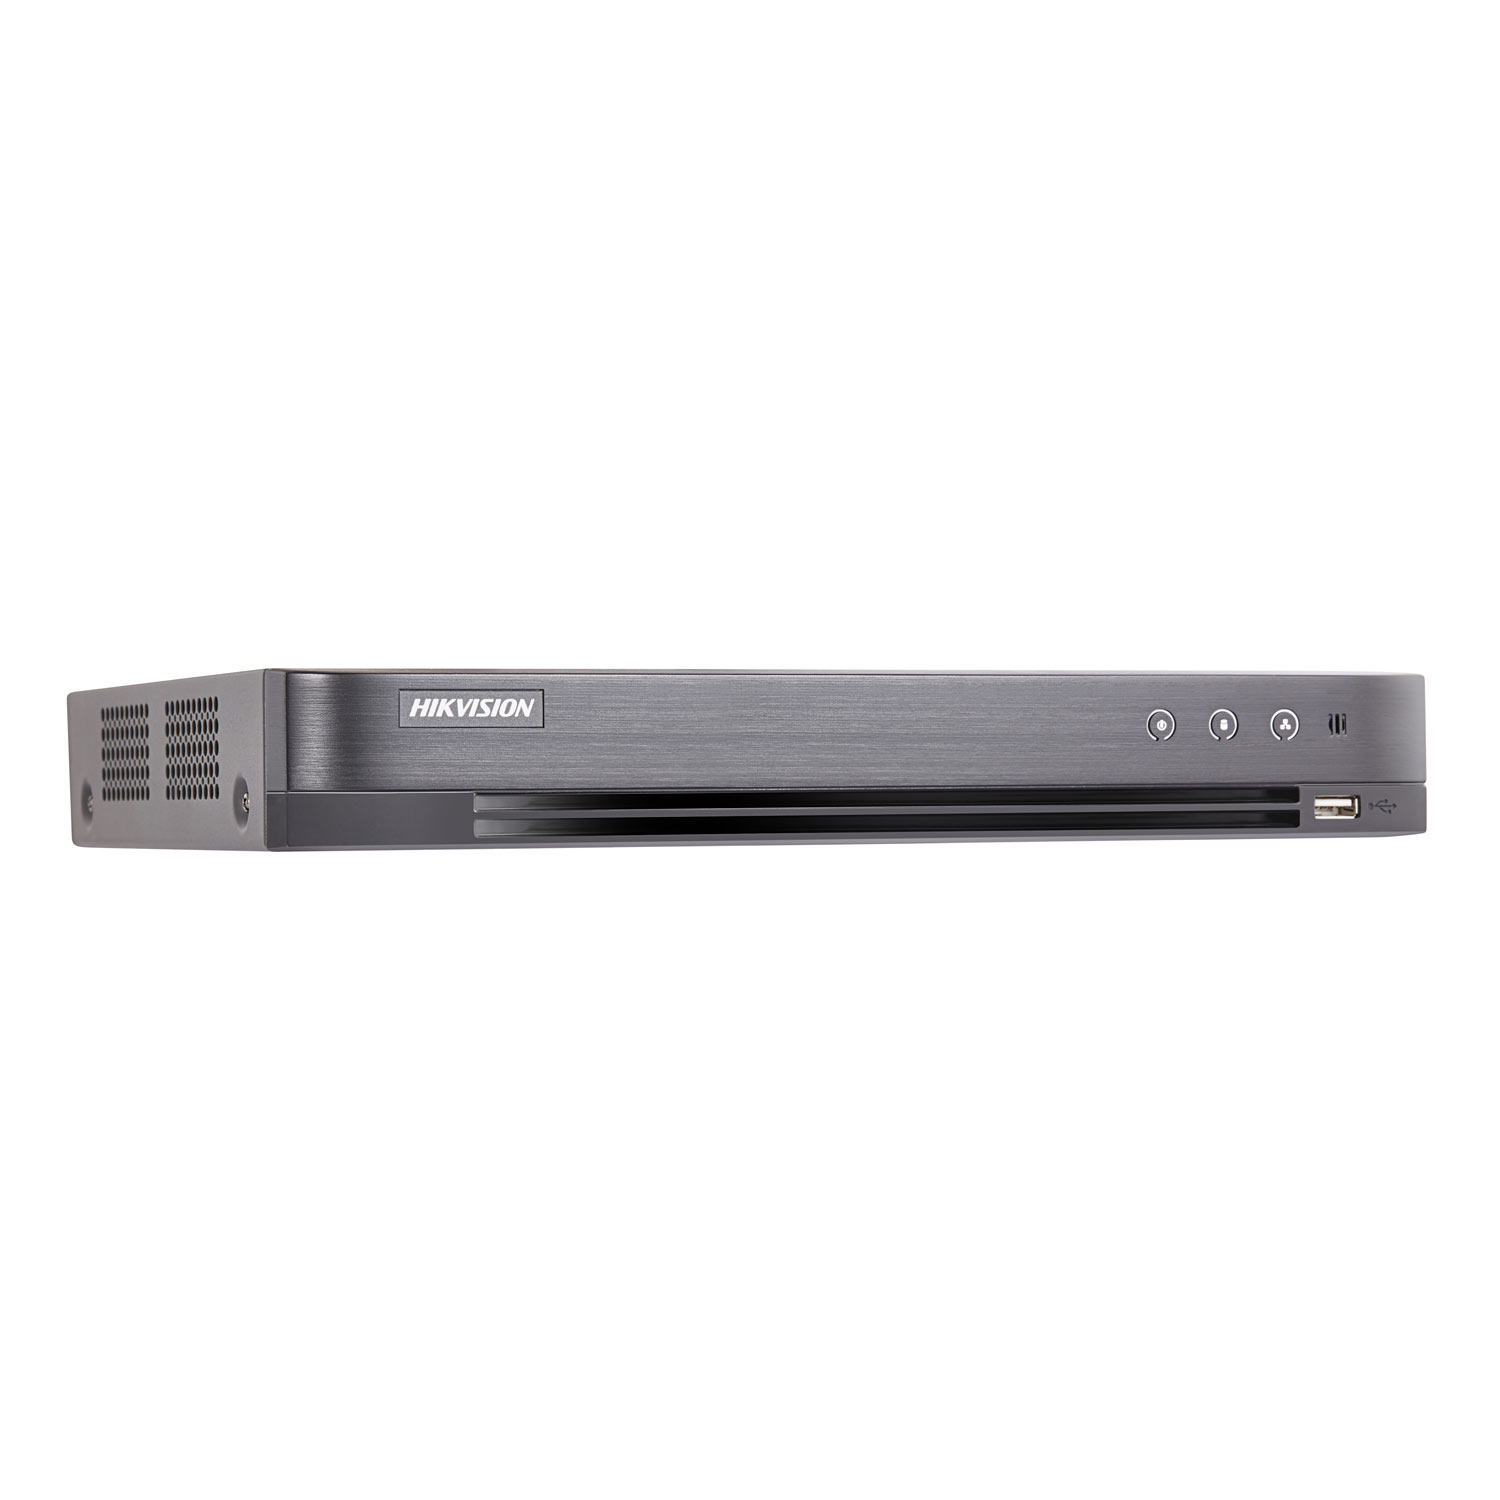 DVR HikVision Turbo HD DS-7204HTHI-K1, 4 canale, 8 MP, audio prin coaxial Audio imagine noua idaho.ro